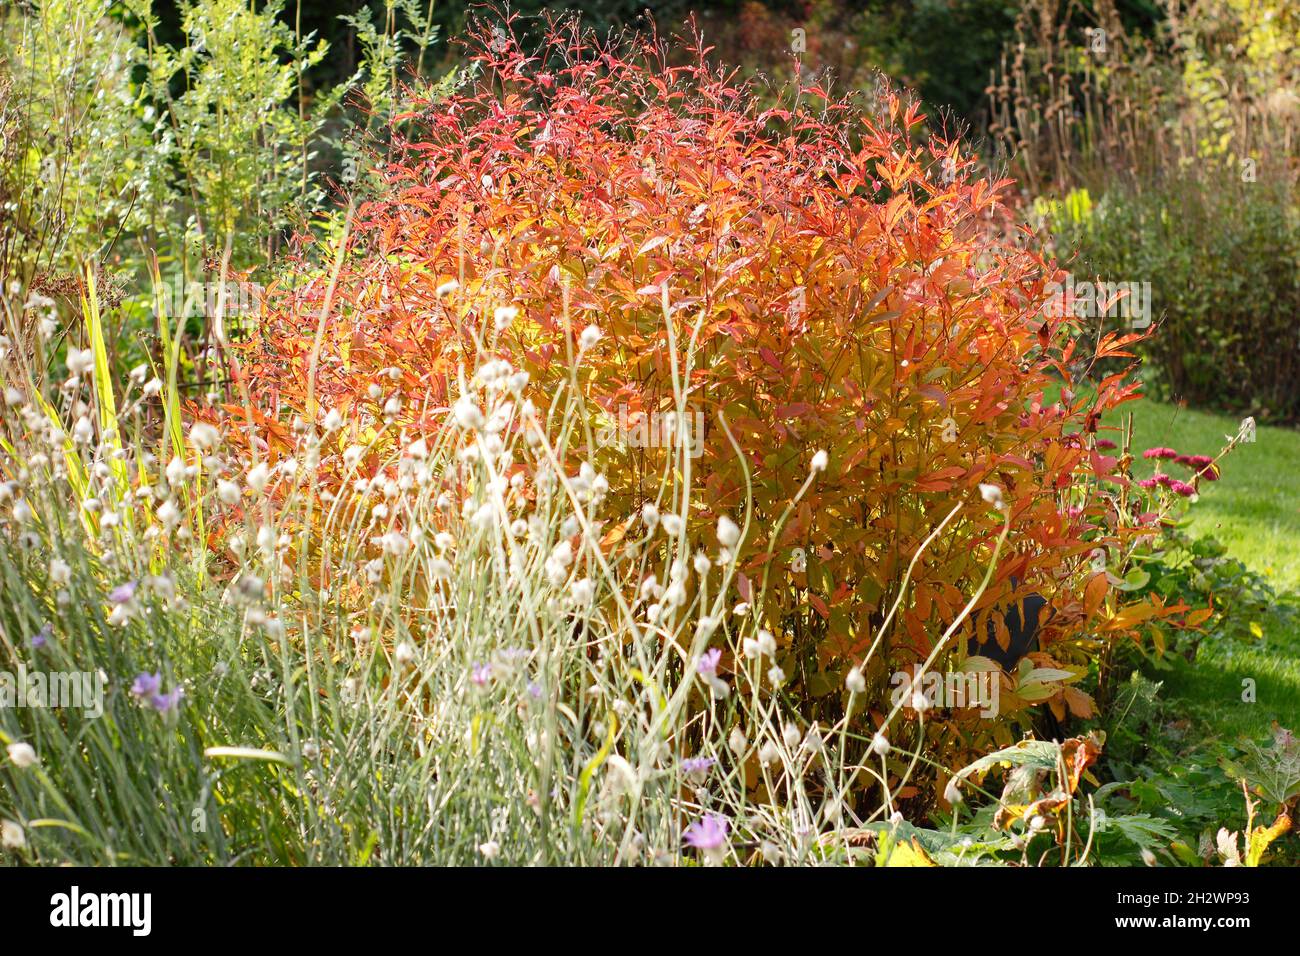 Catananche caerulea seedheads (front) and fiery red autumn leaves of   Gillenia trifoliata (Bowman's root). UK Stock Photo